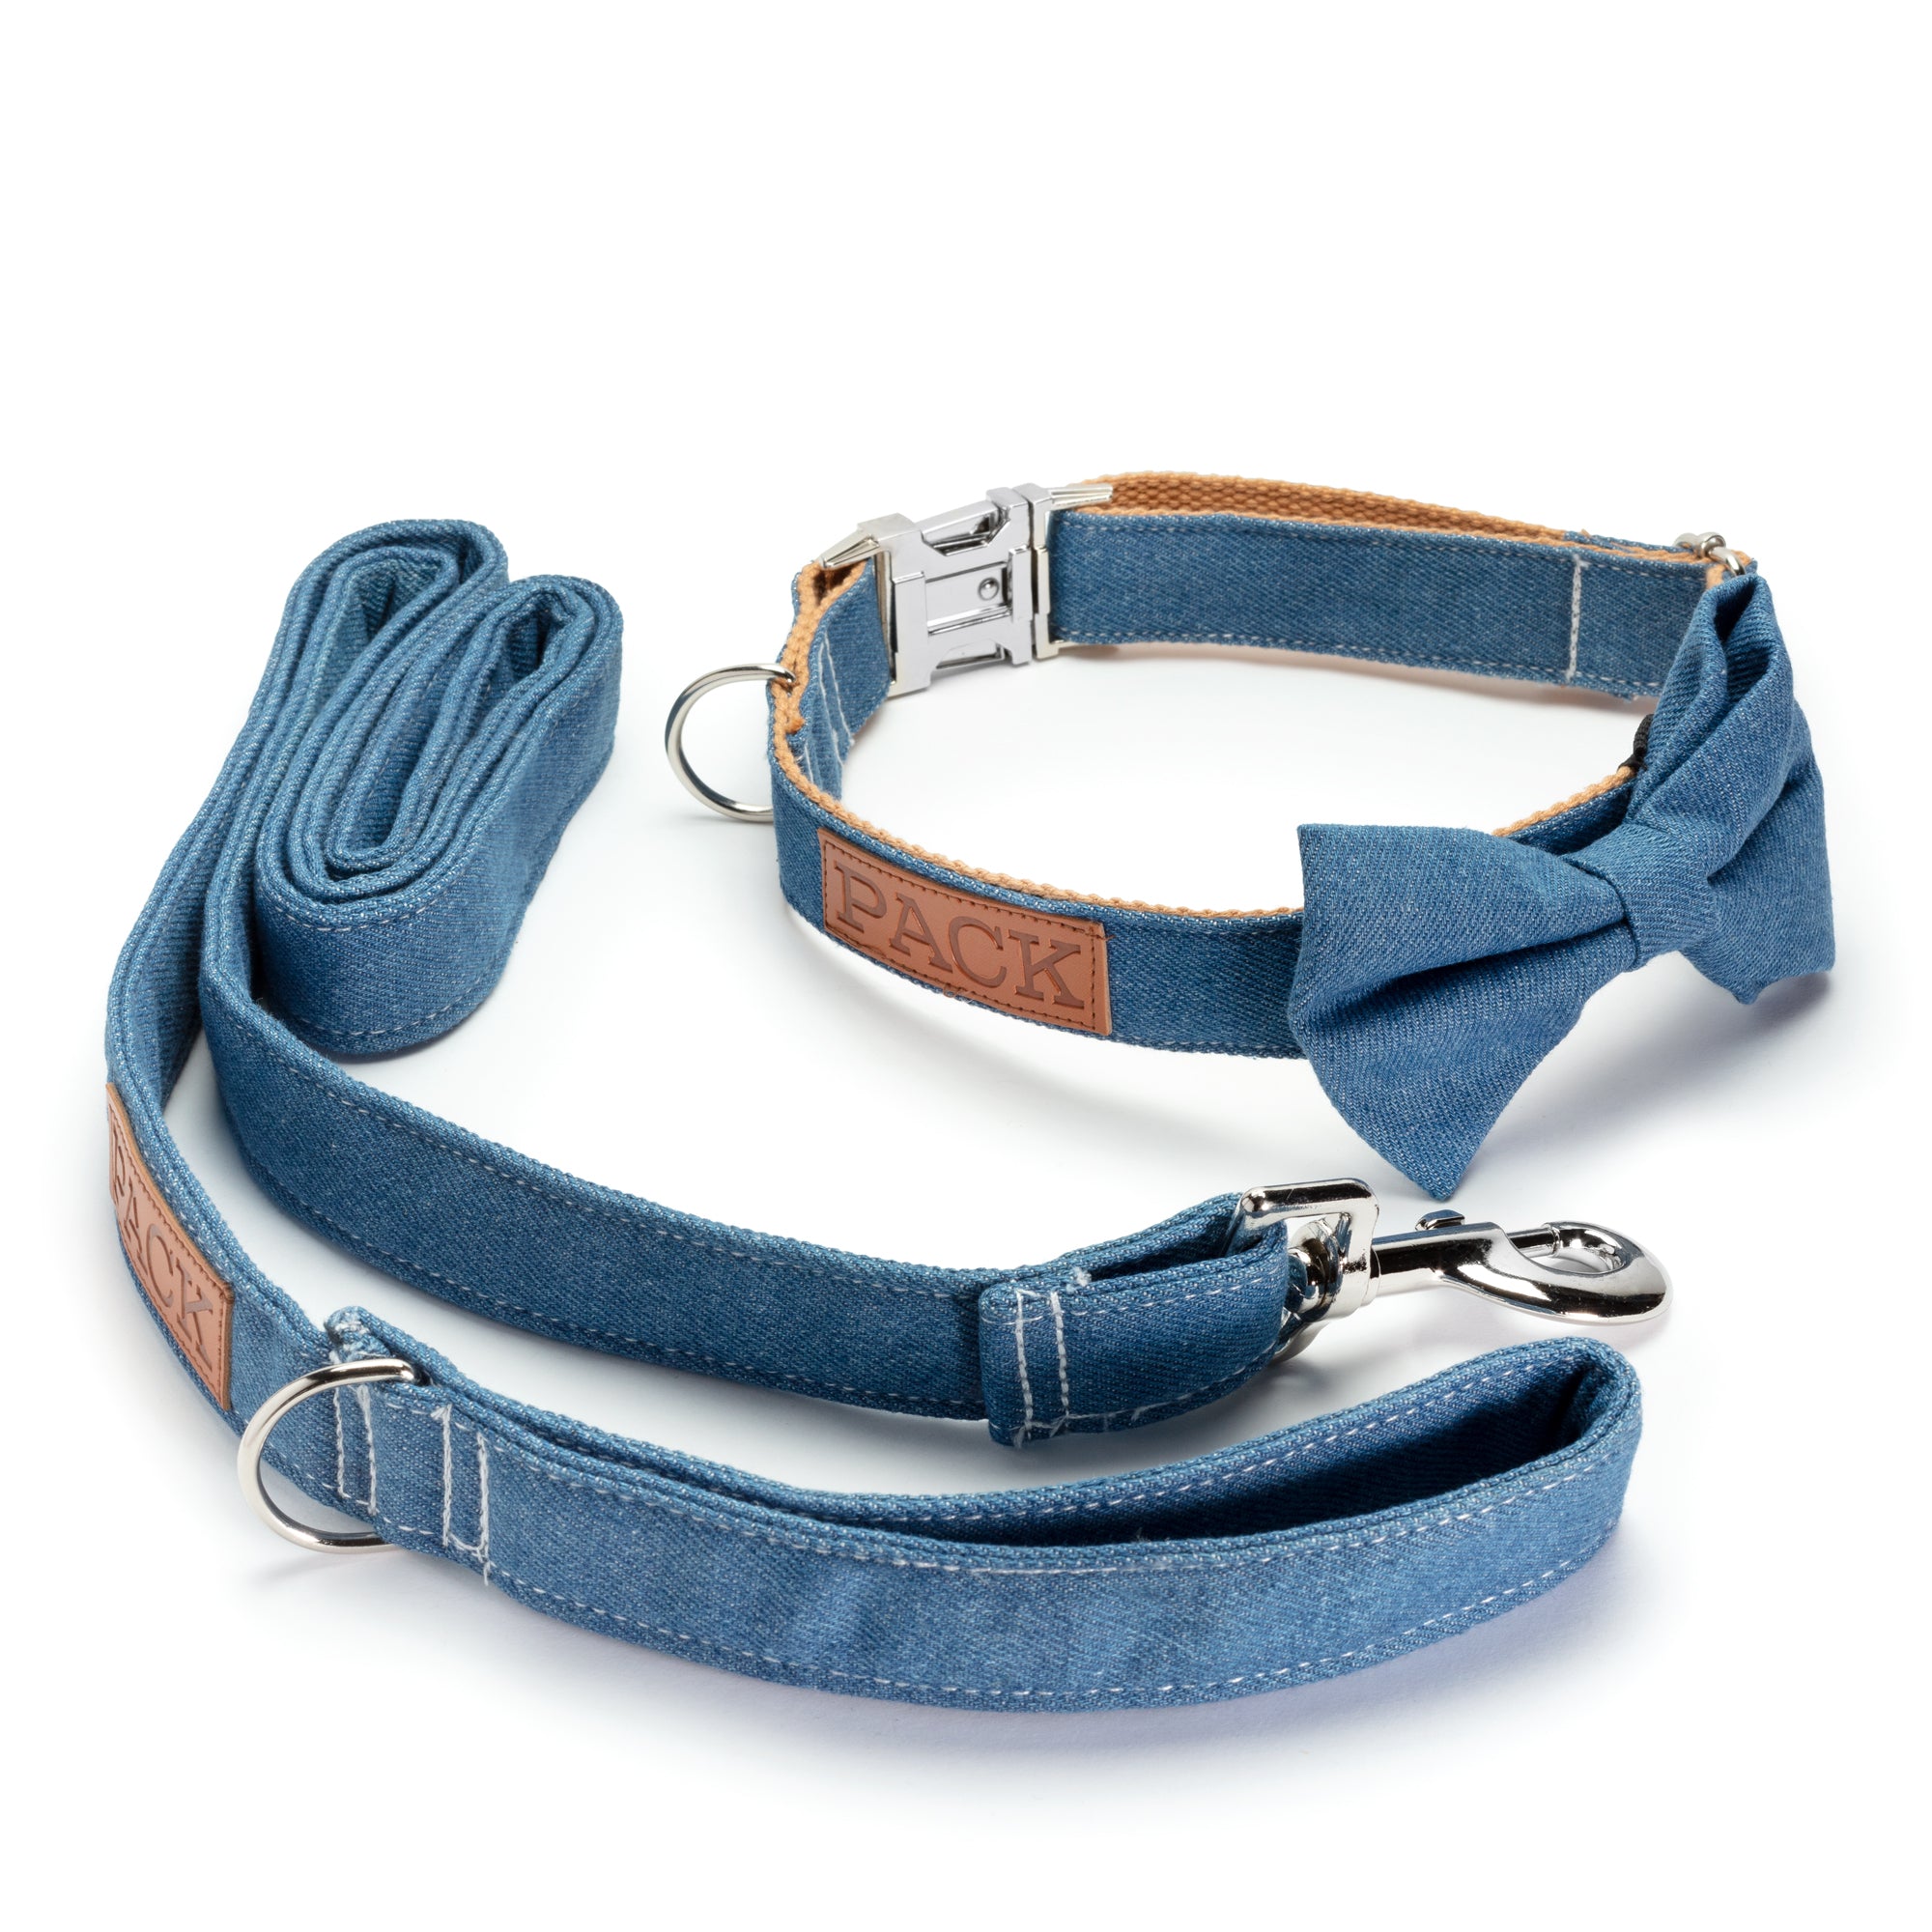 pretty dog collars and leashes